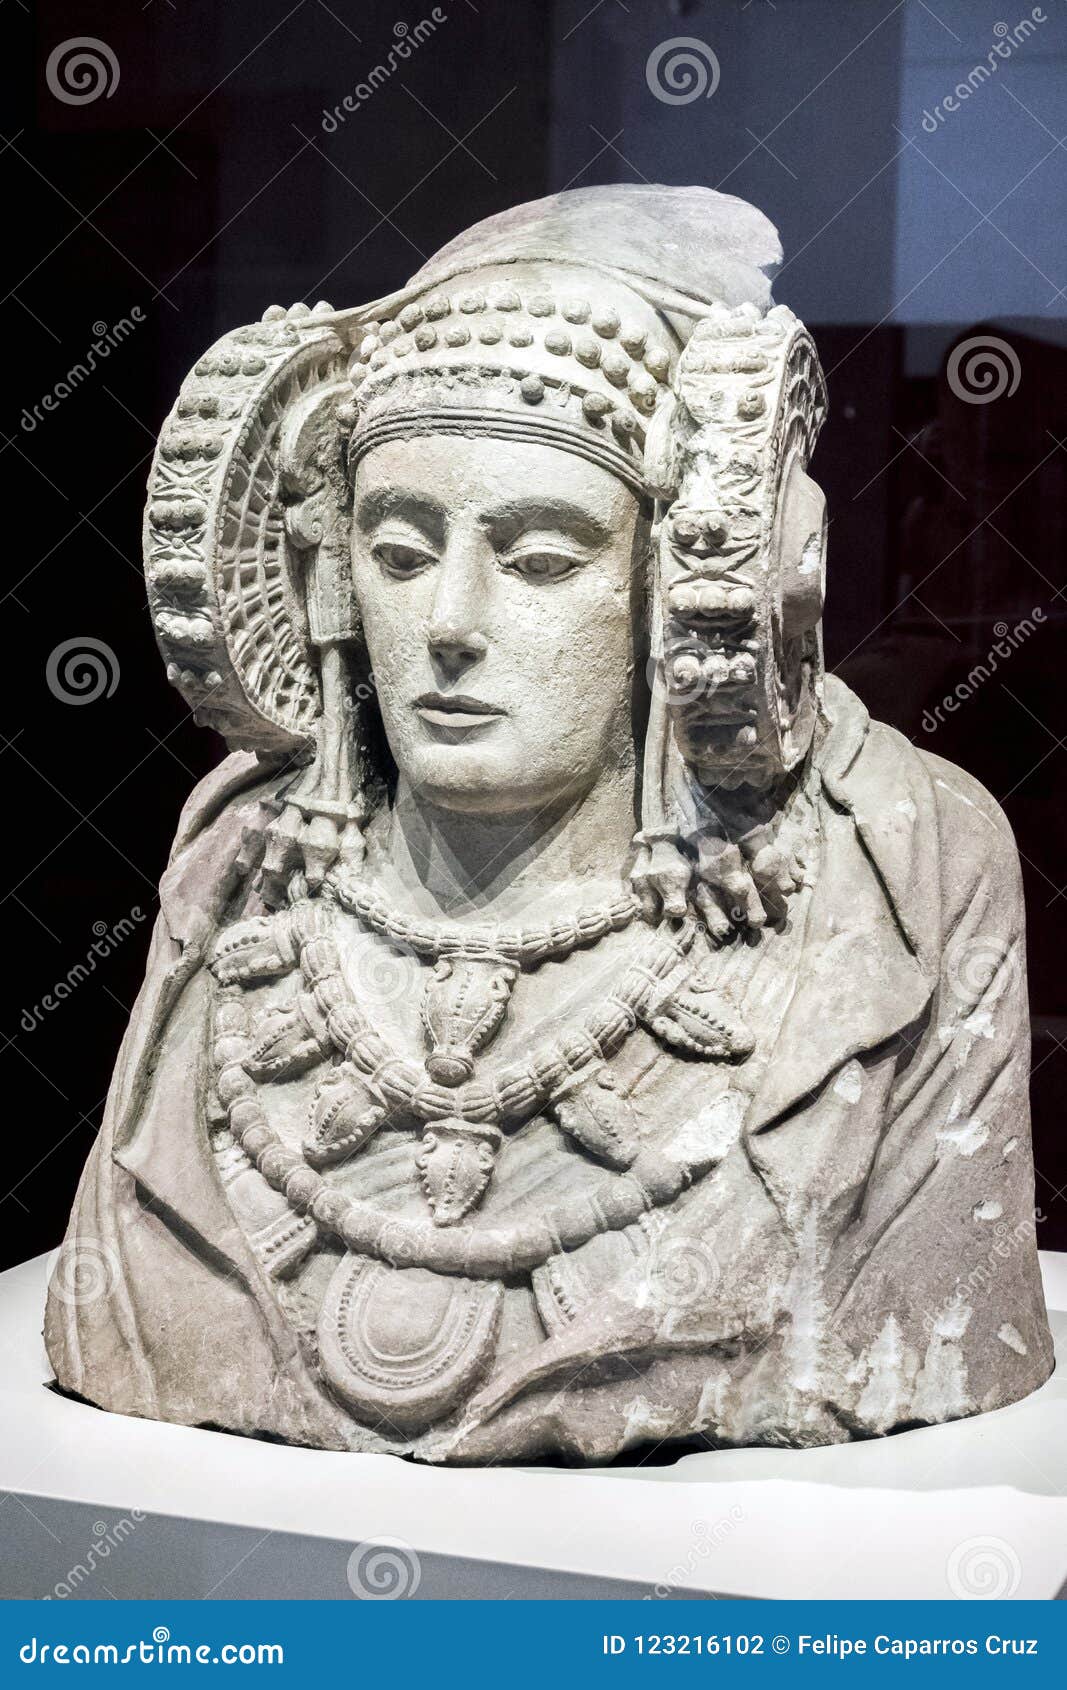 lady-of-elche-at-national-archeological-museum-of-madrid-spain